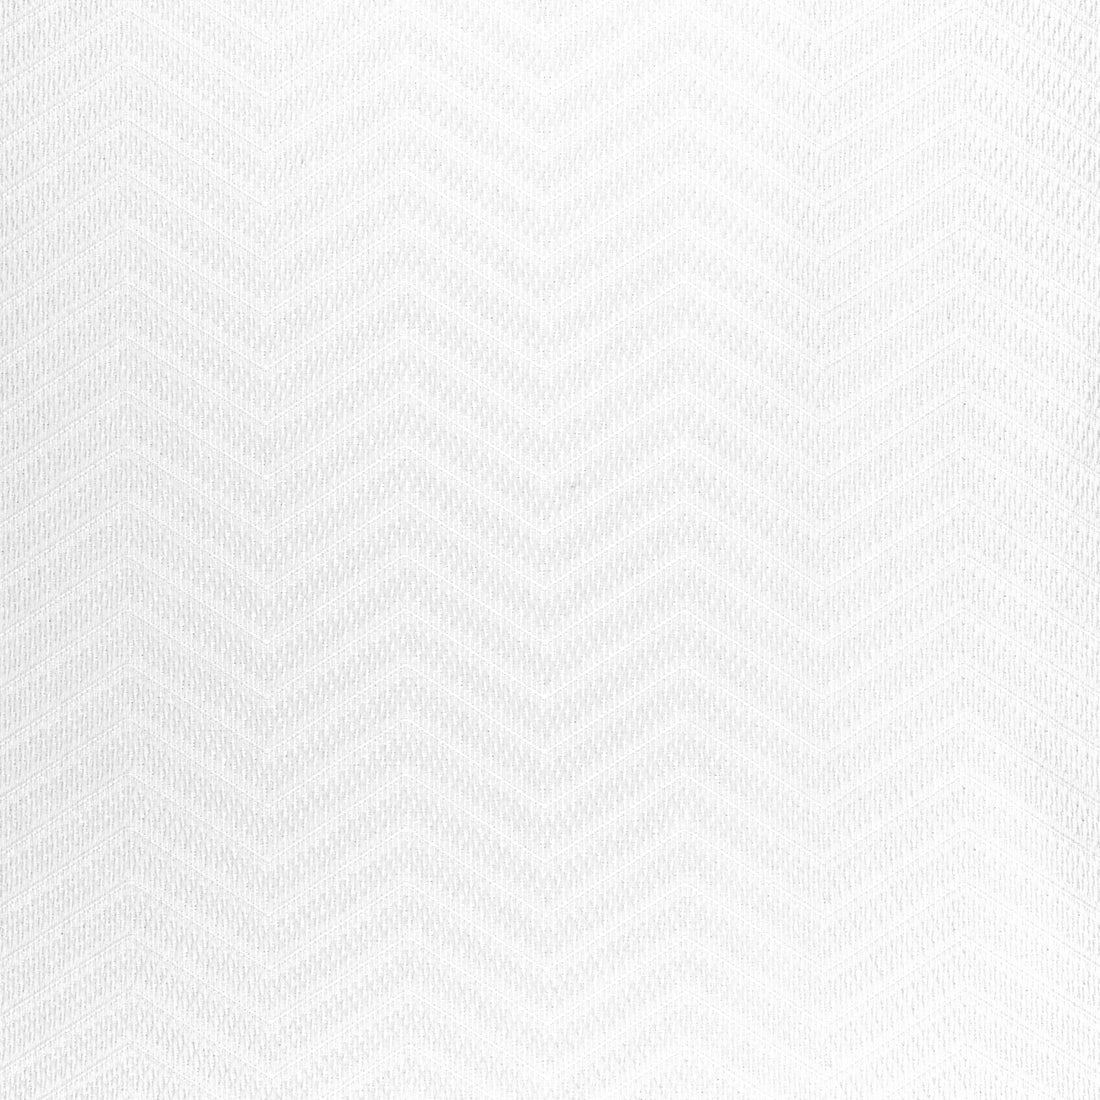 Matari Chevron fabric in white color - pattern number W80632 - by Thibaut in the Pinnacle collection